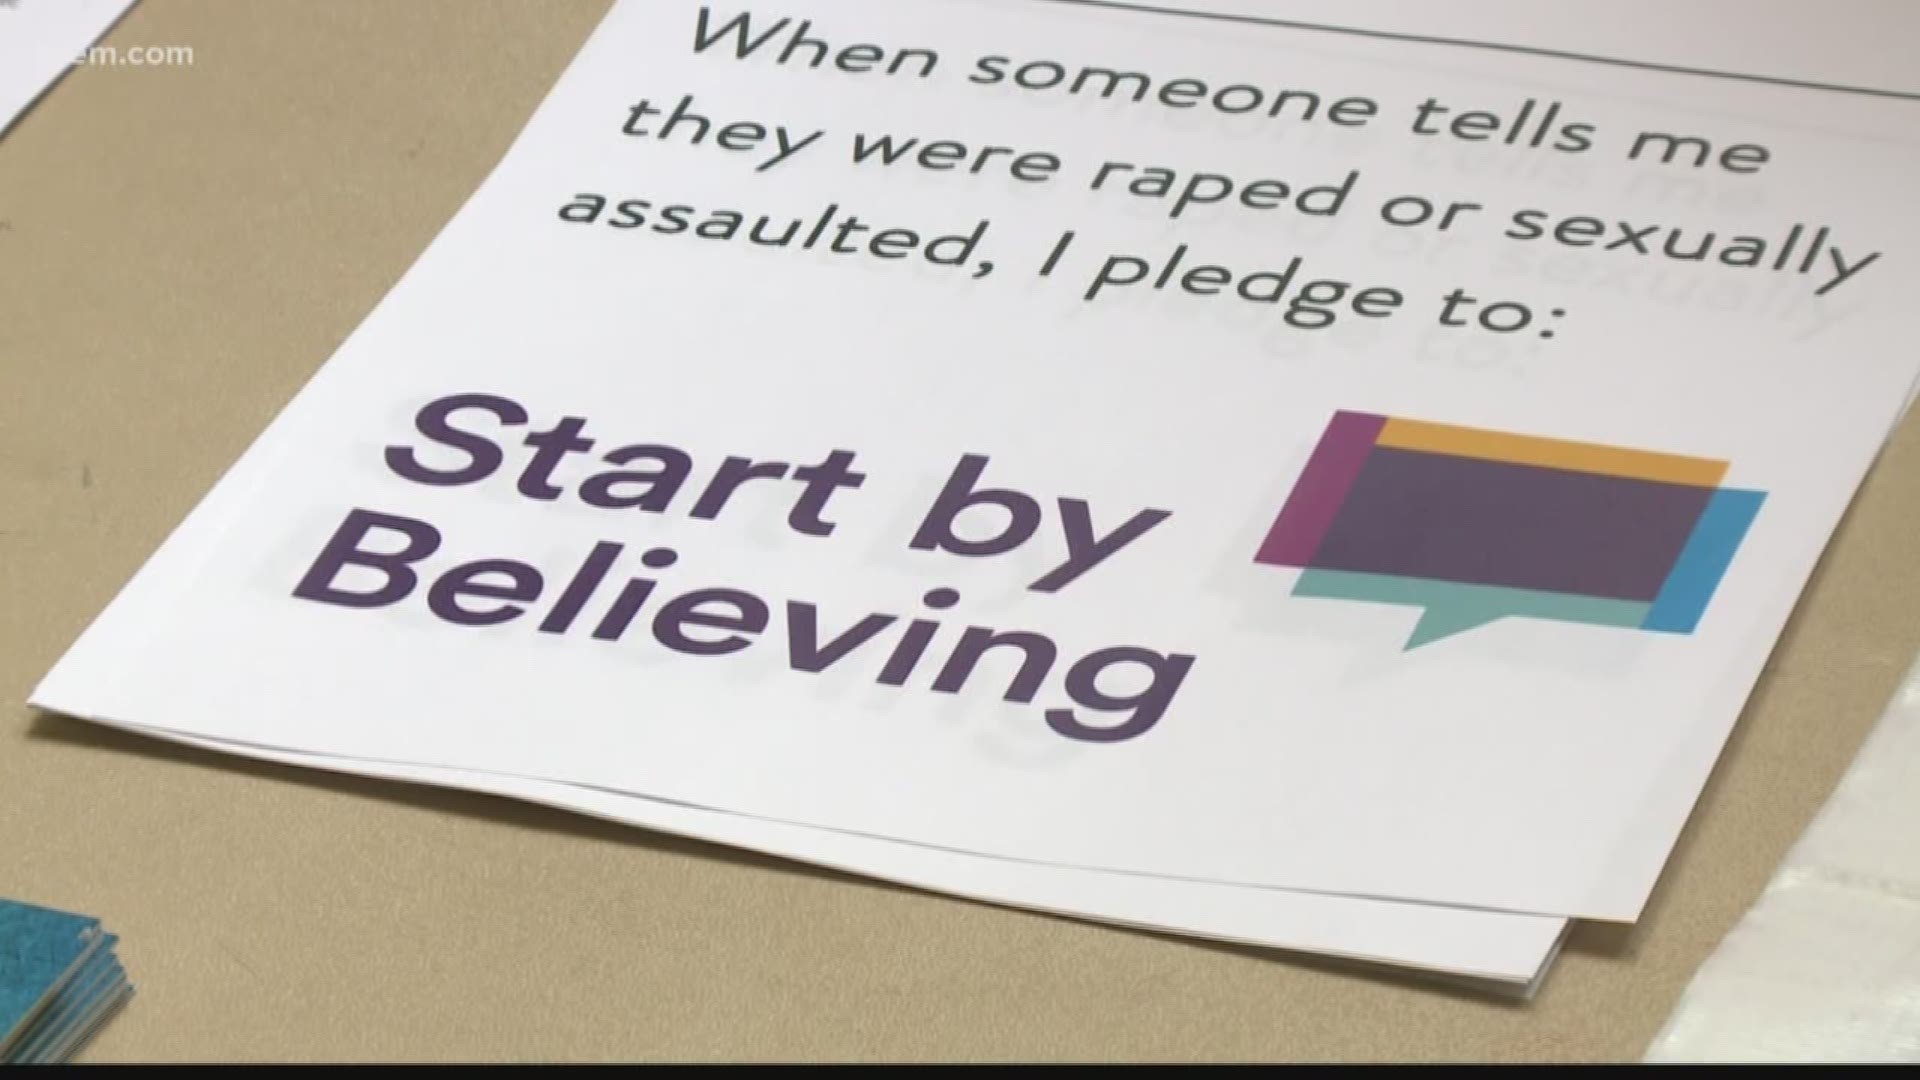 Last April, Spokane advocacy groups started "Start by Believing." This year, they're taking it step further for Sexual Violence Awareness month.